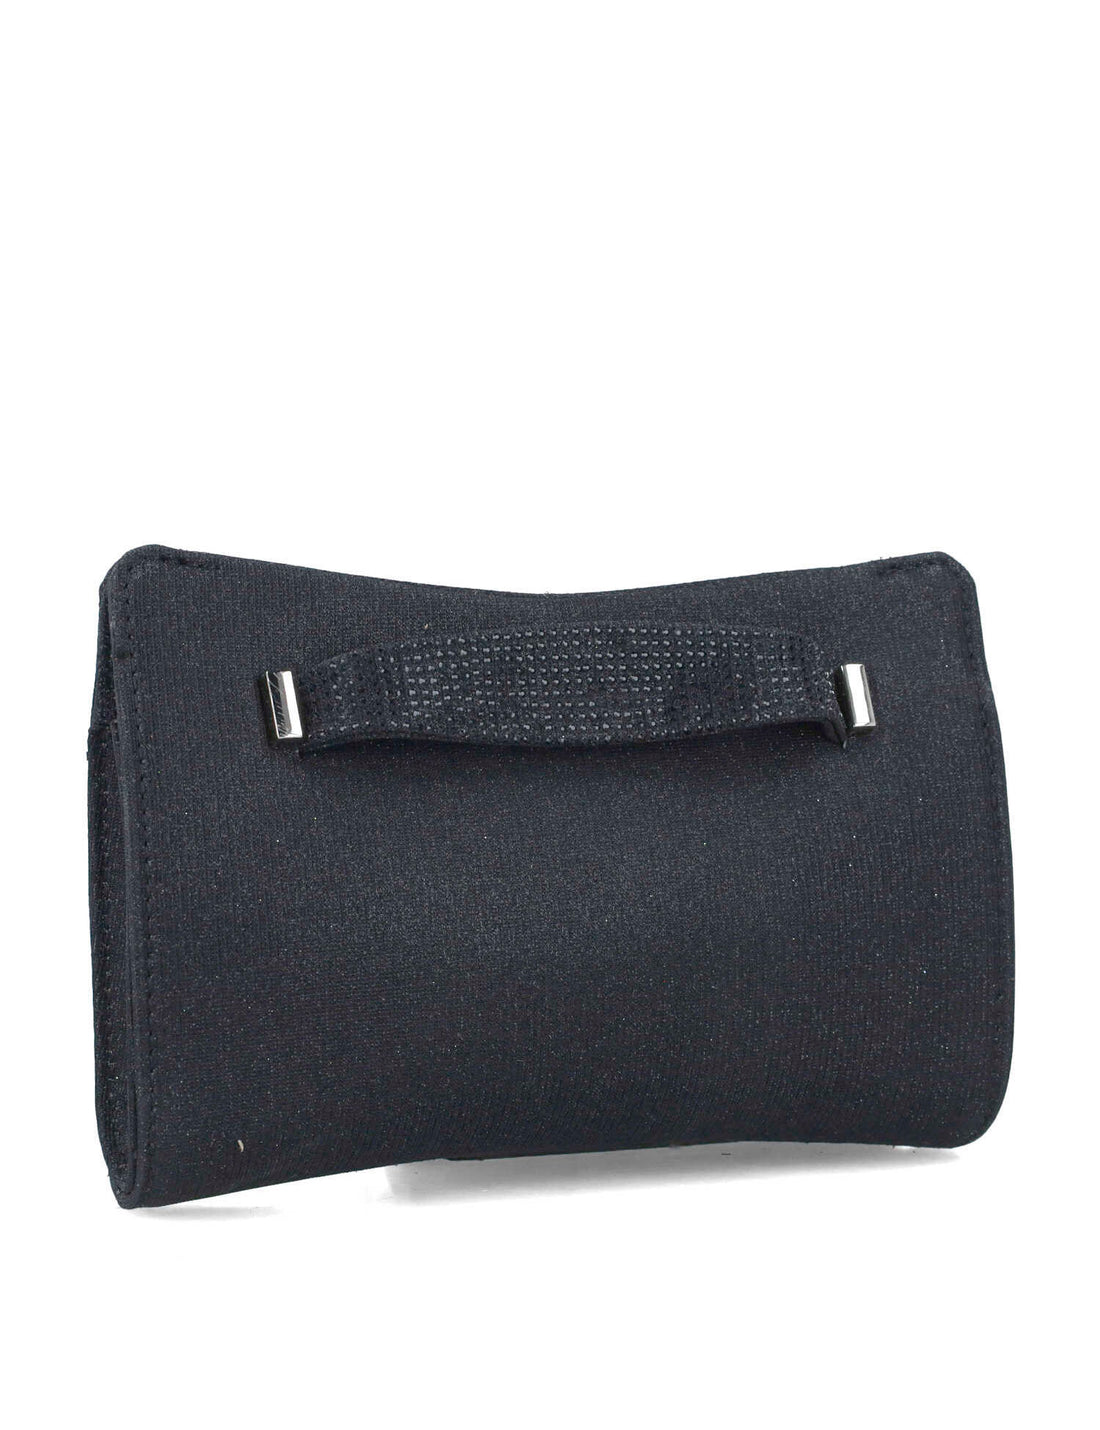 Black Clutch With Hand Strap_85510_01_02